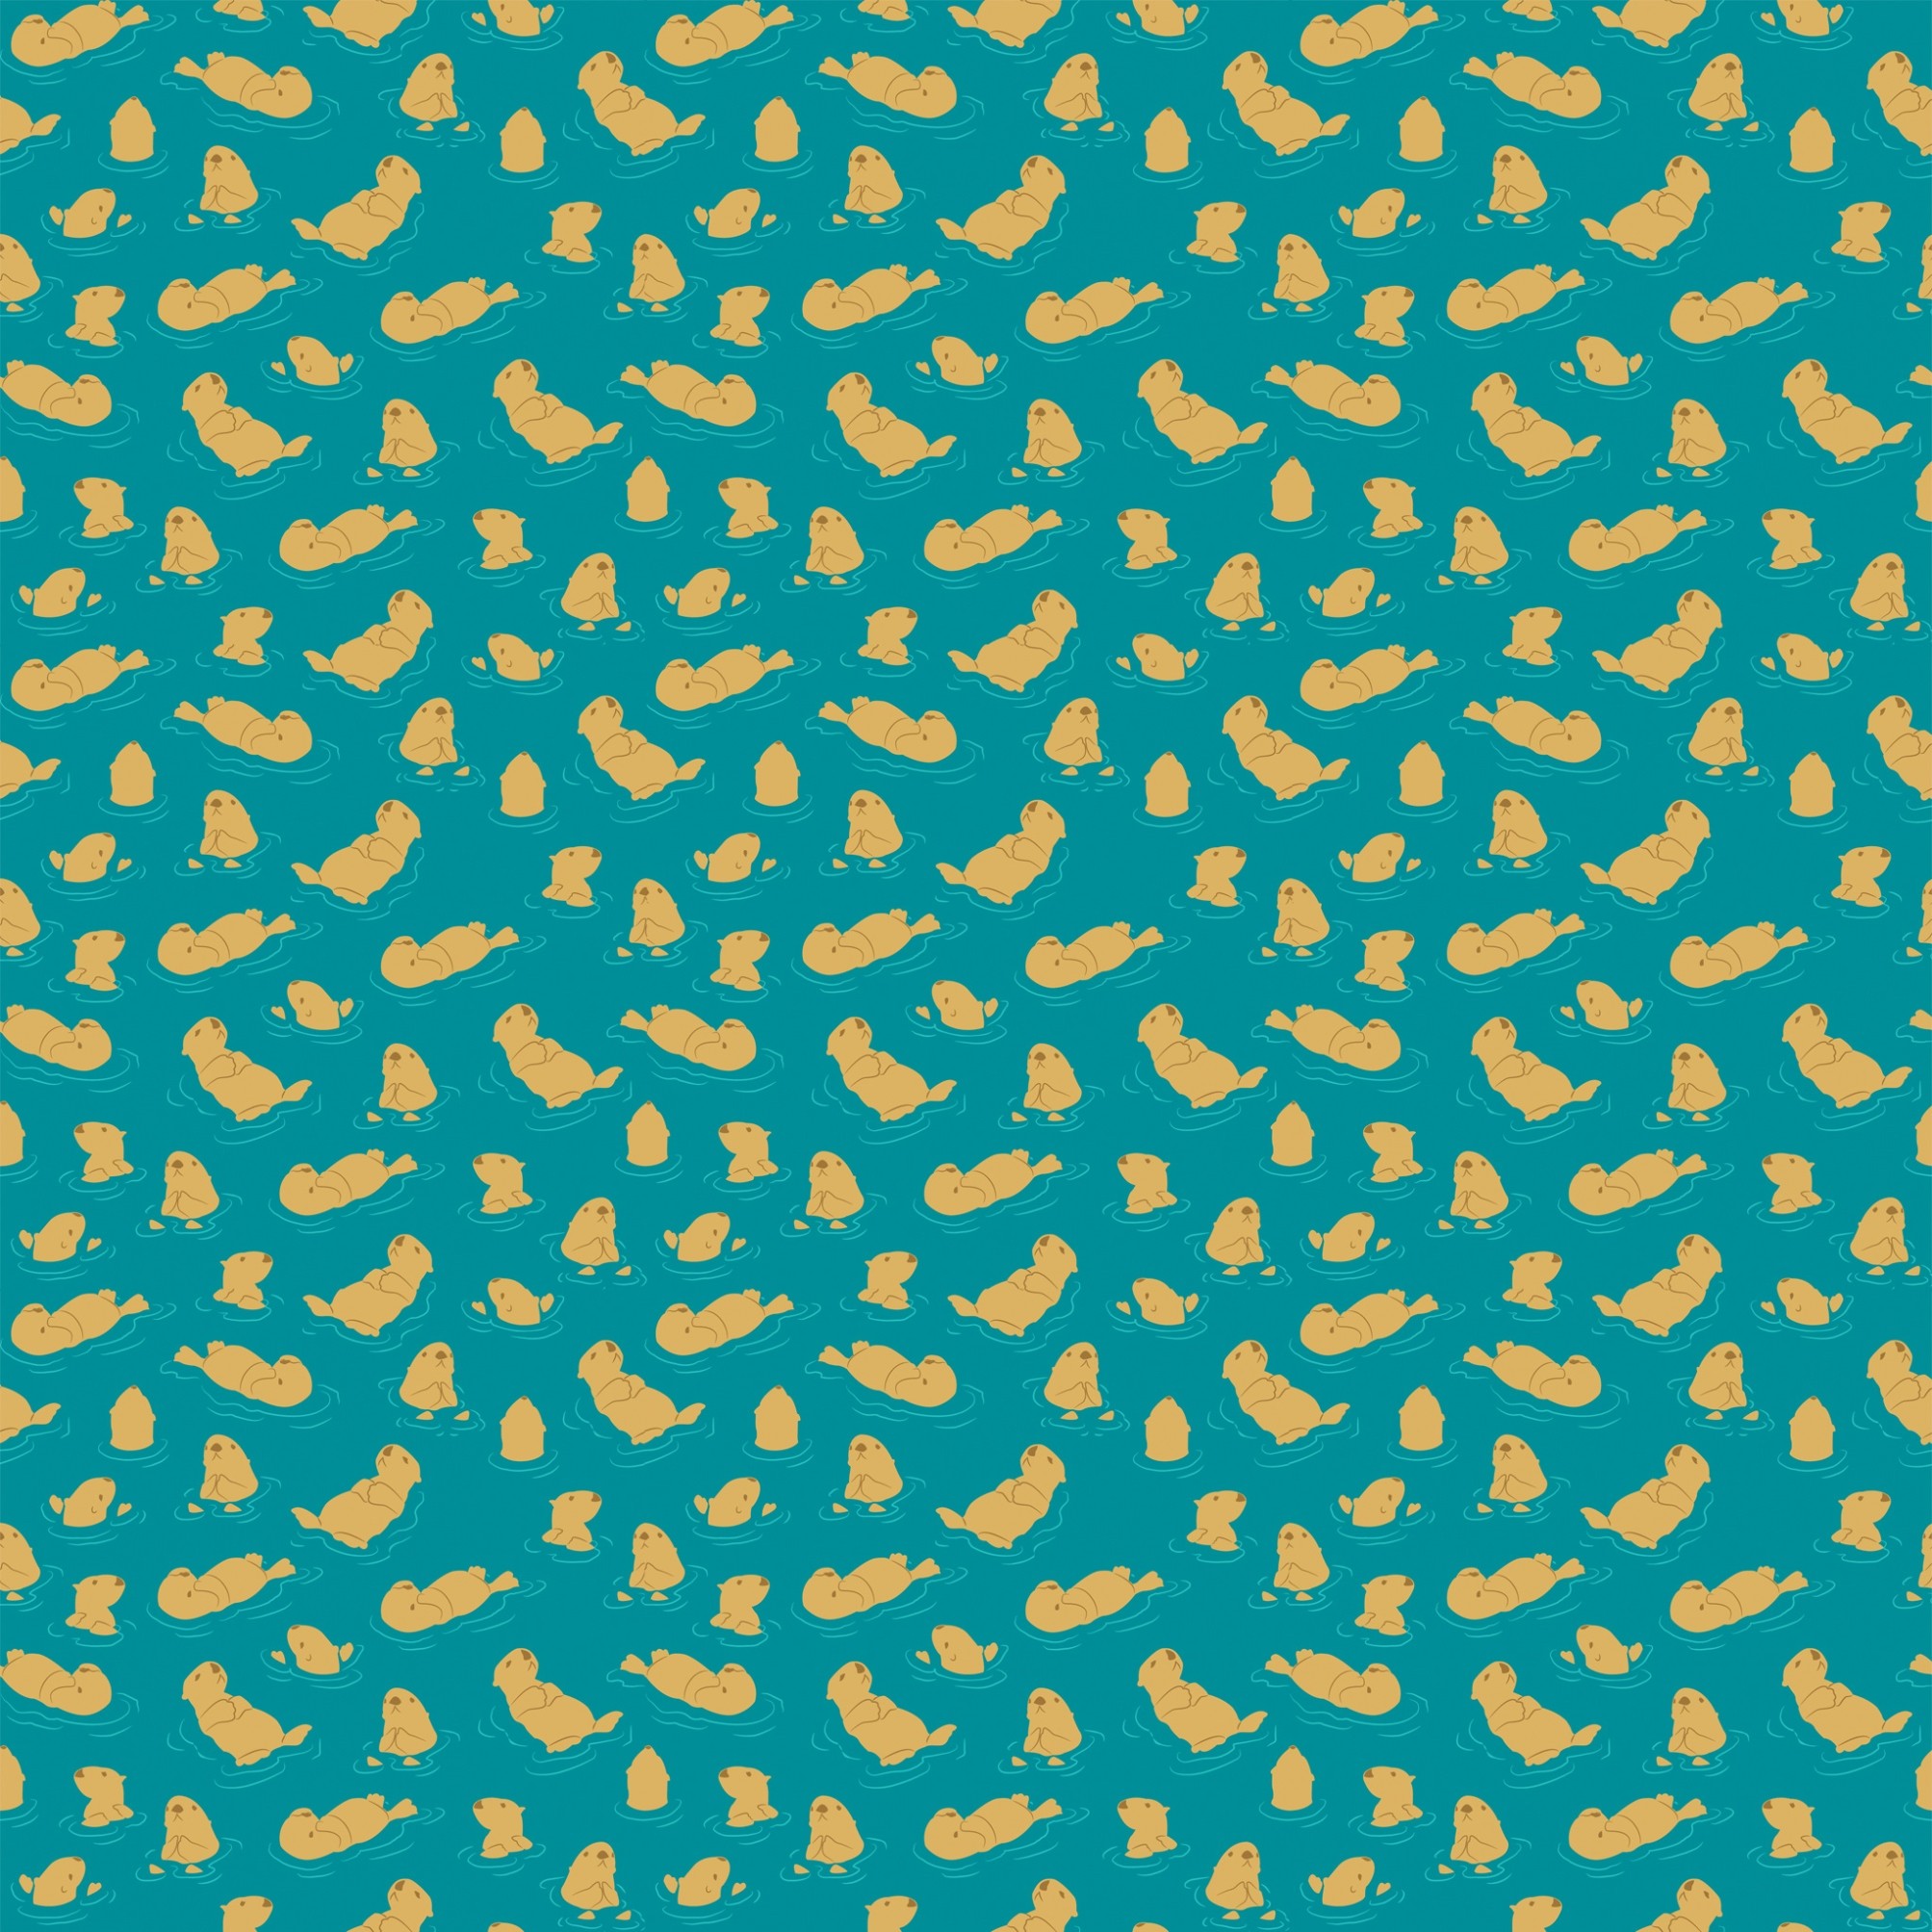 2007x2007 Indie Pattern Backgrounds Tumblr | Q Pattern with Indie Iphone Wallpaper